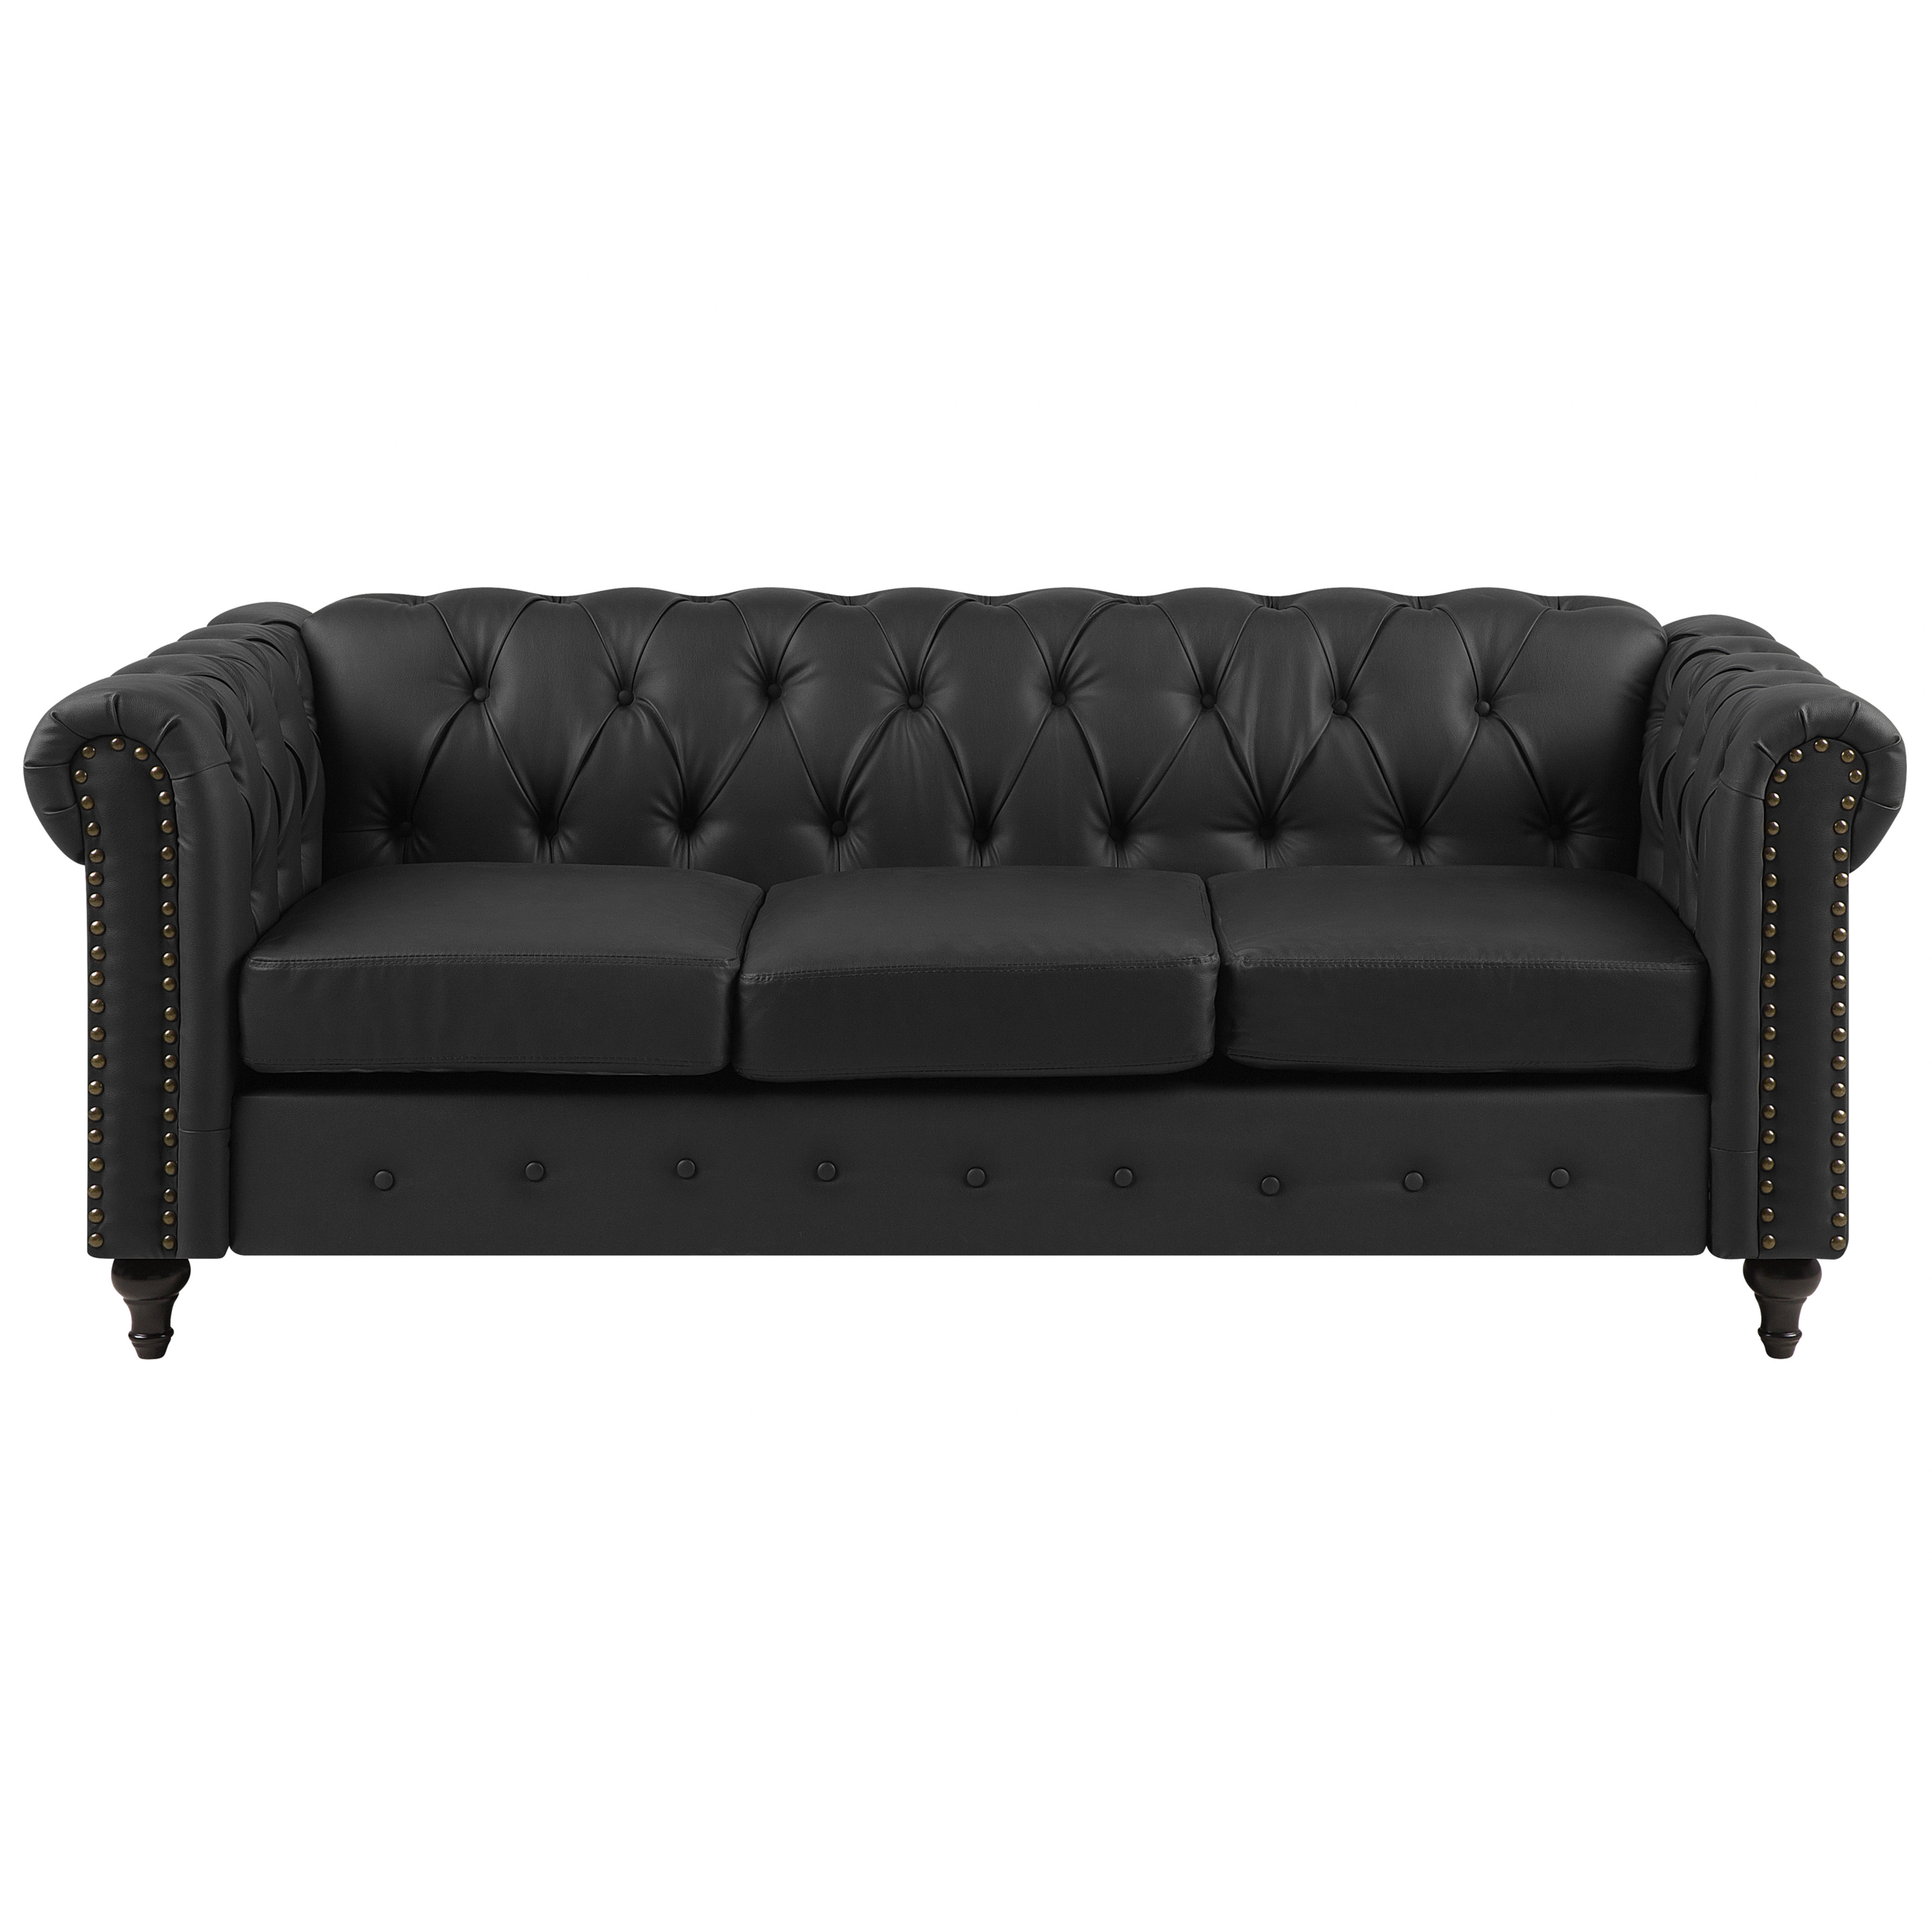 Beliani Chesterfield Sofa Black Faux Leather Upholstery Dark Wood Legs 3 Seater Nailhead Trim Contemporary